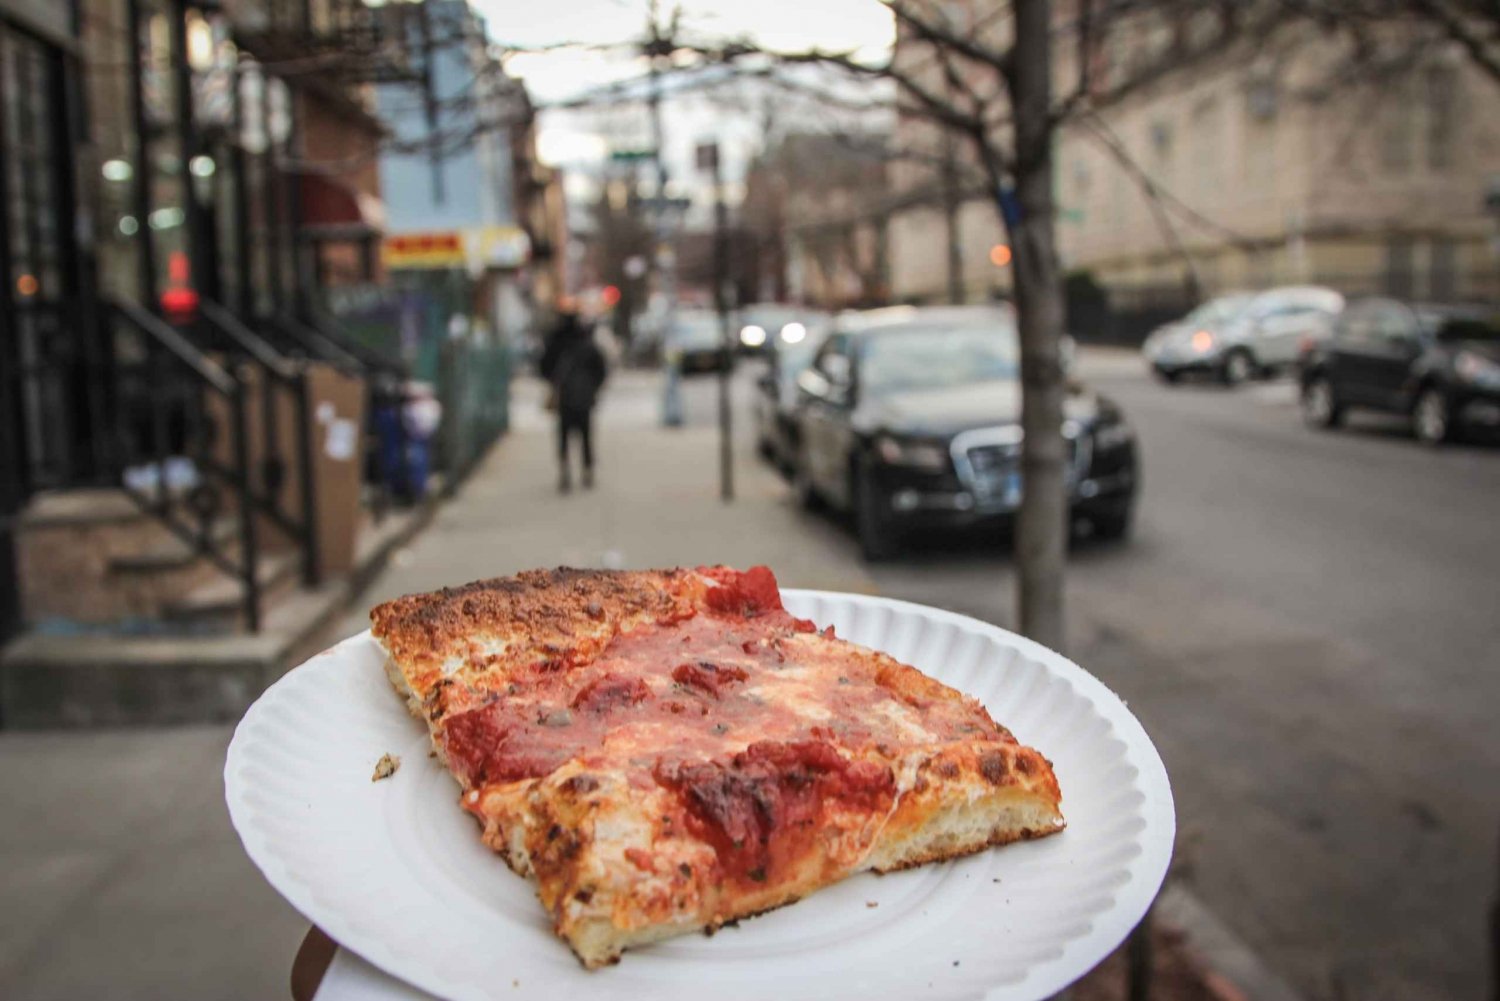 Brooklyn: 3-Hour Private Pizza and Brewery Walking Tour